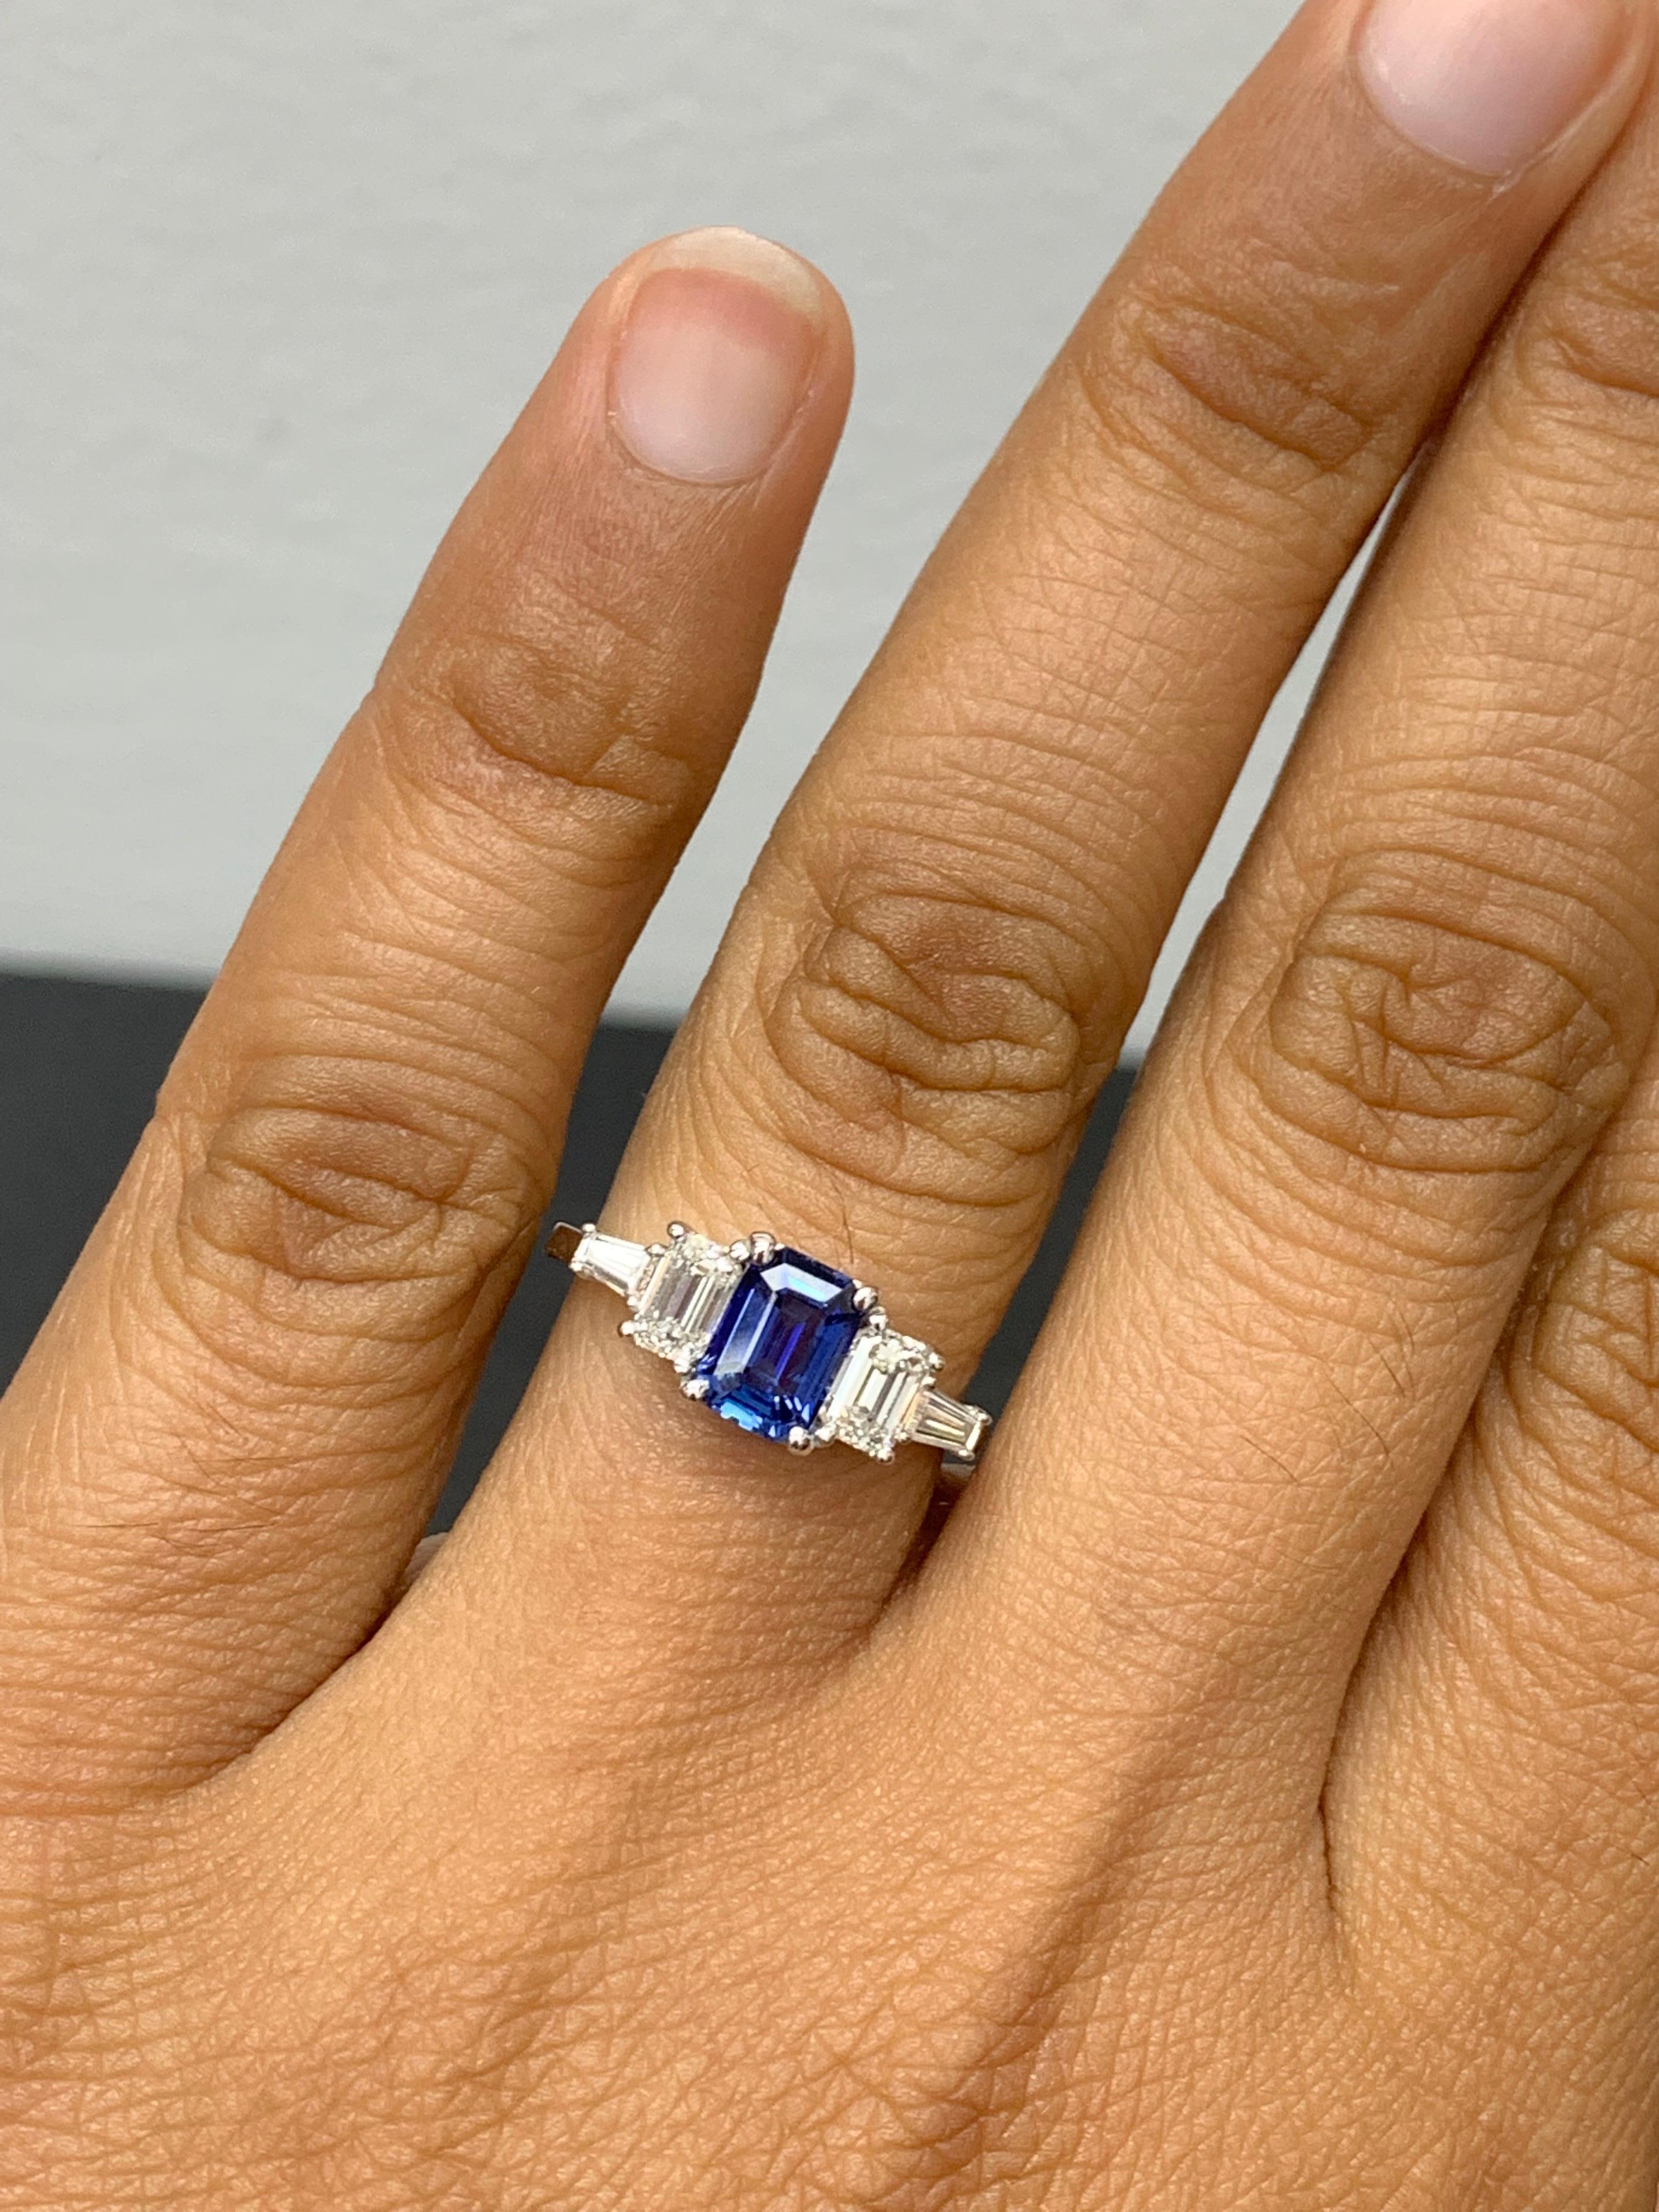 Modern 1.12 Carat Emerald Cut Blue Sapphire and Diamond 5 Stone Ring in 14K White Gold For Sale